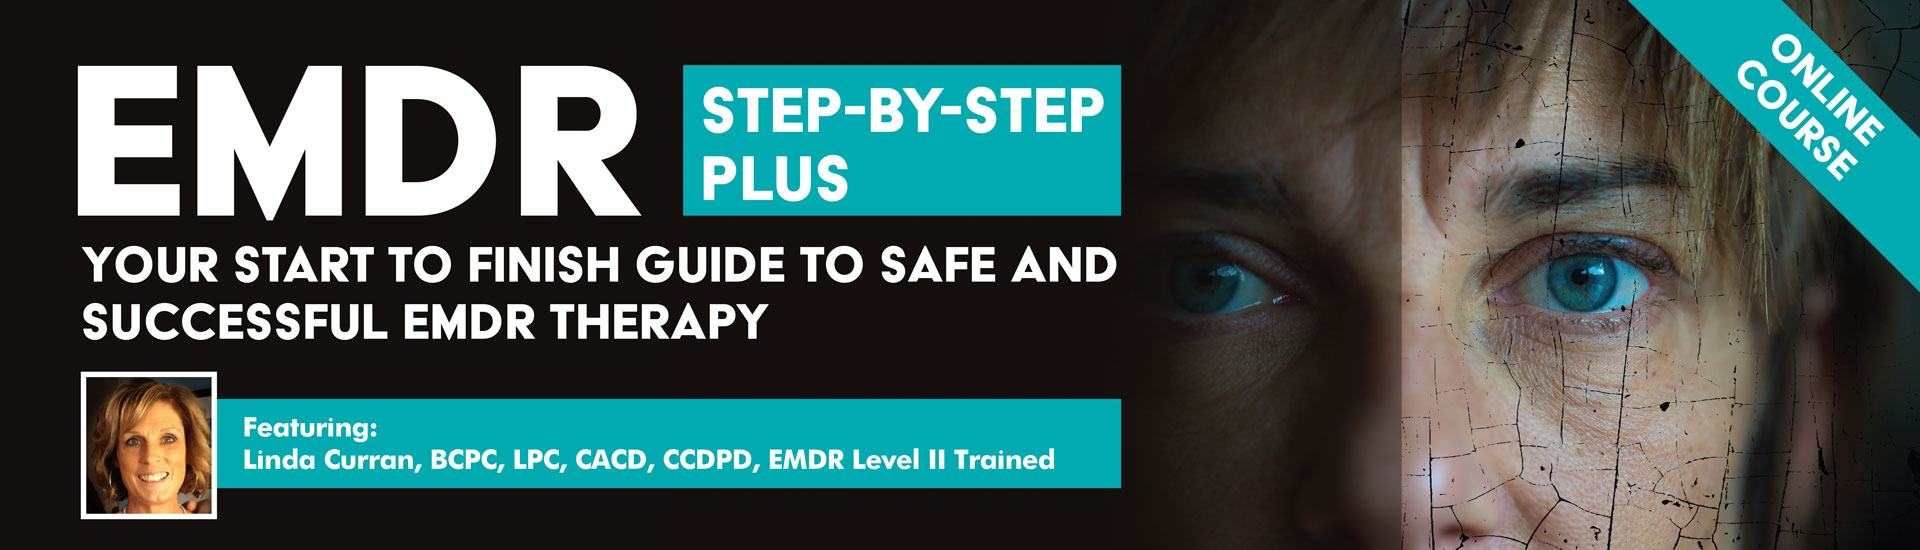 EMDR Step by-Step PLUS: Your start to finish guide to safe and successful EMDR therapy